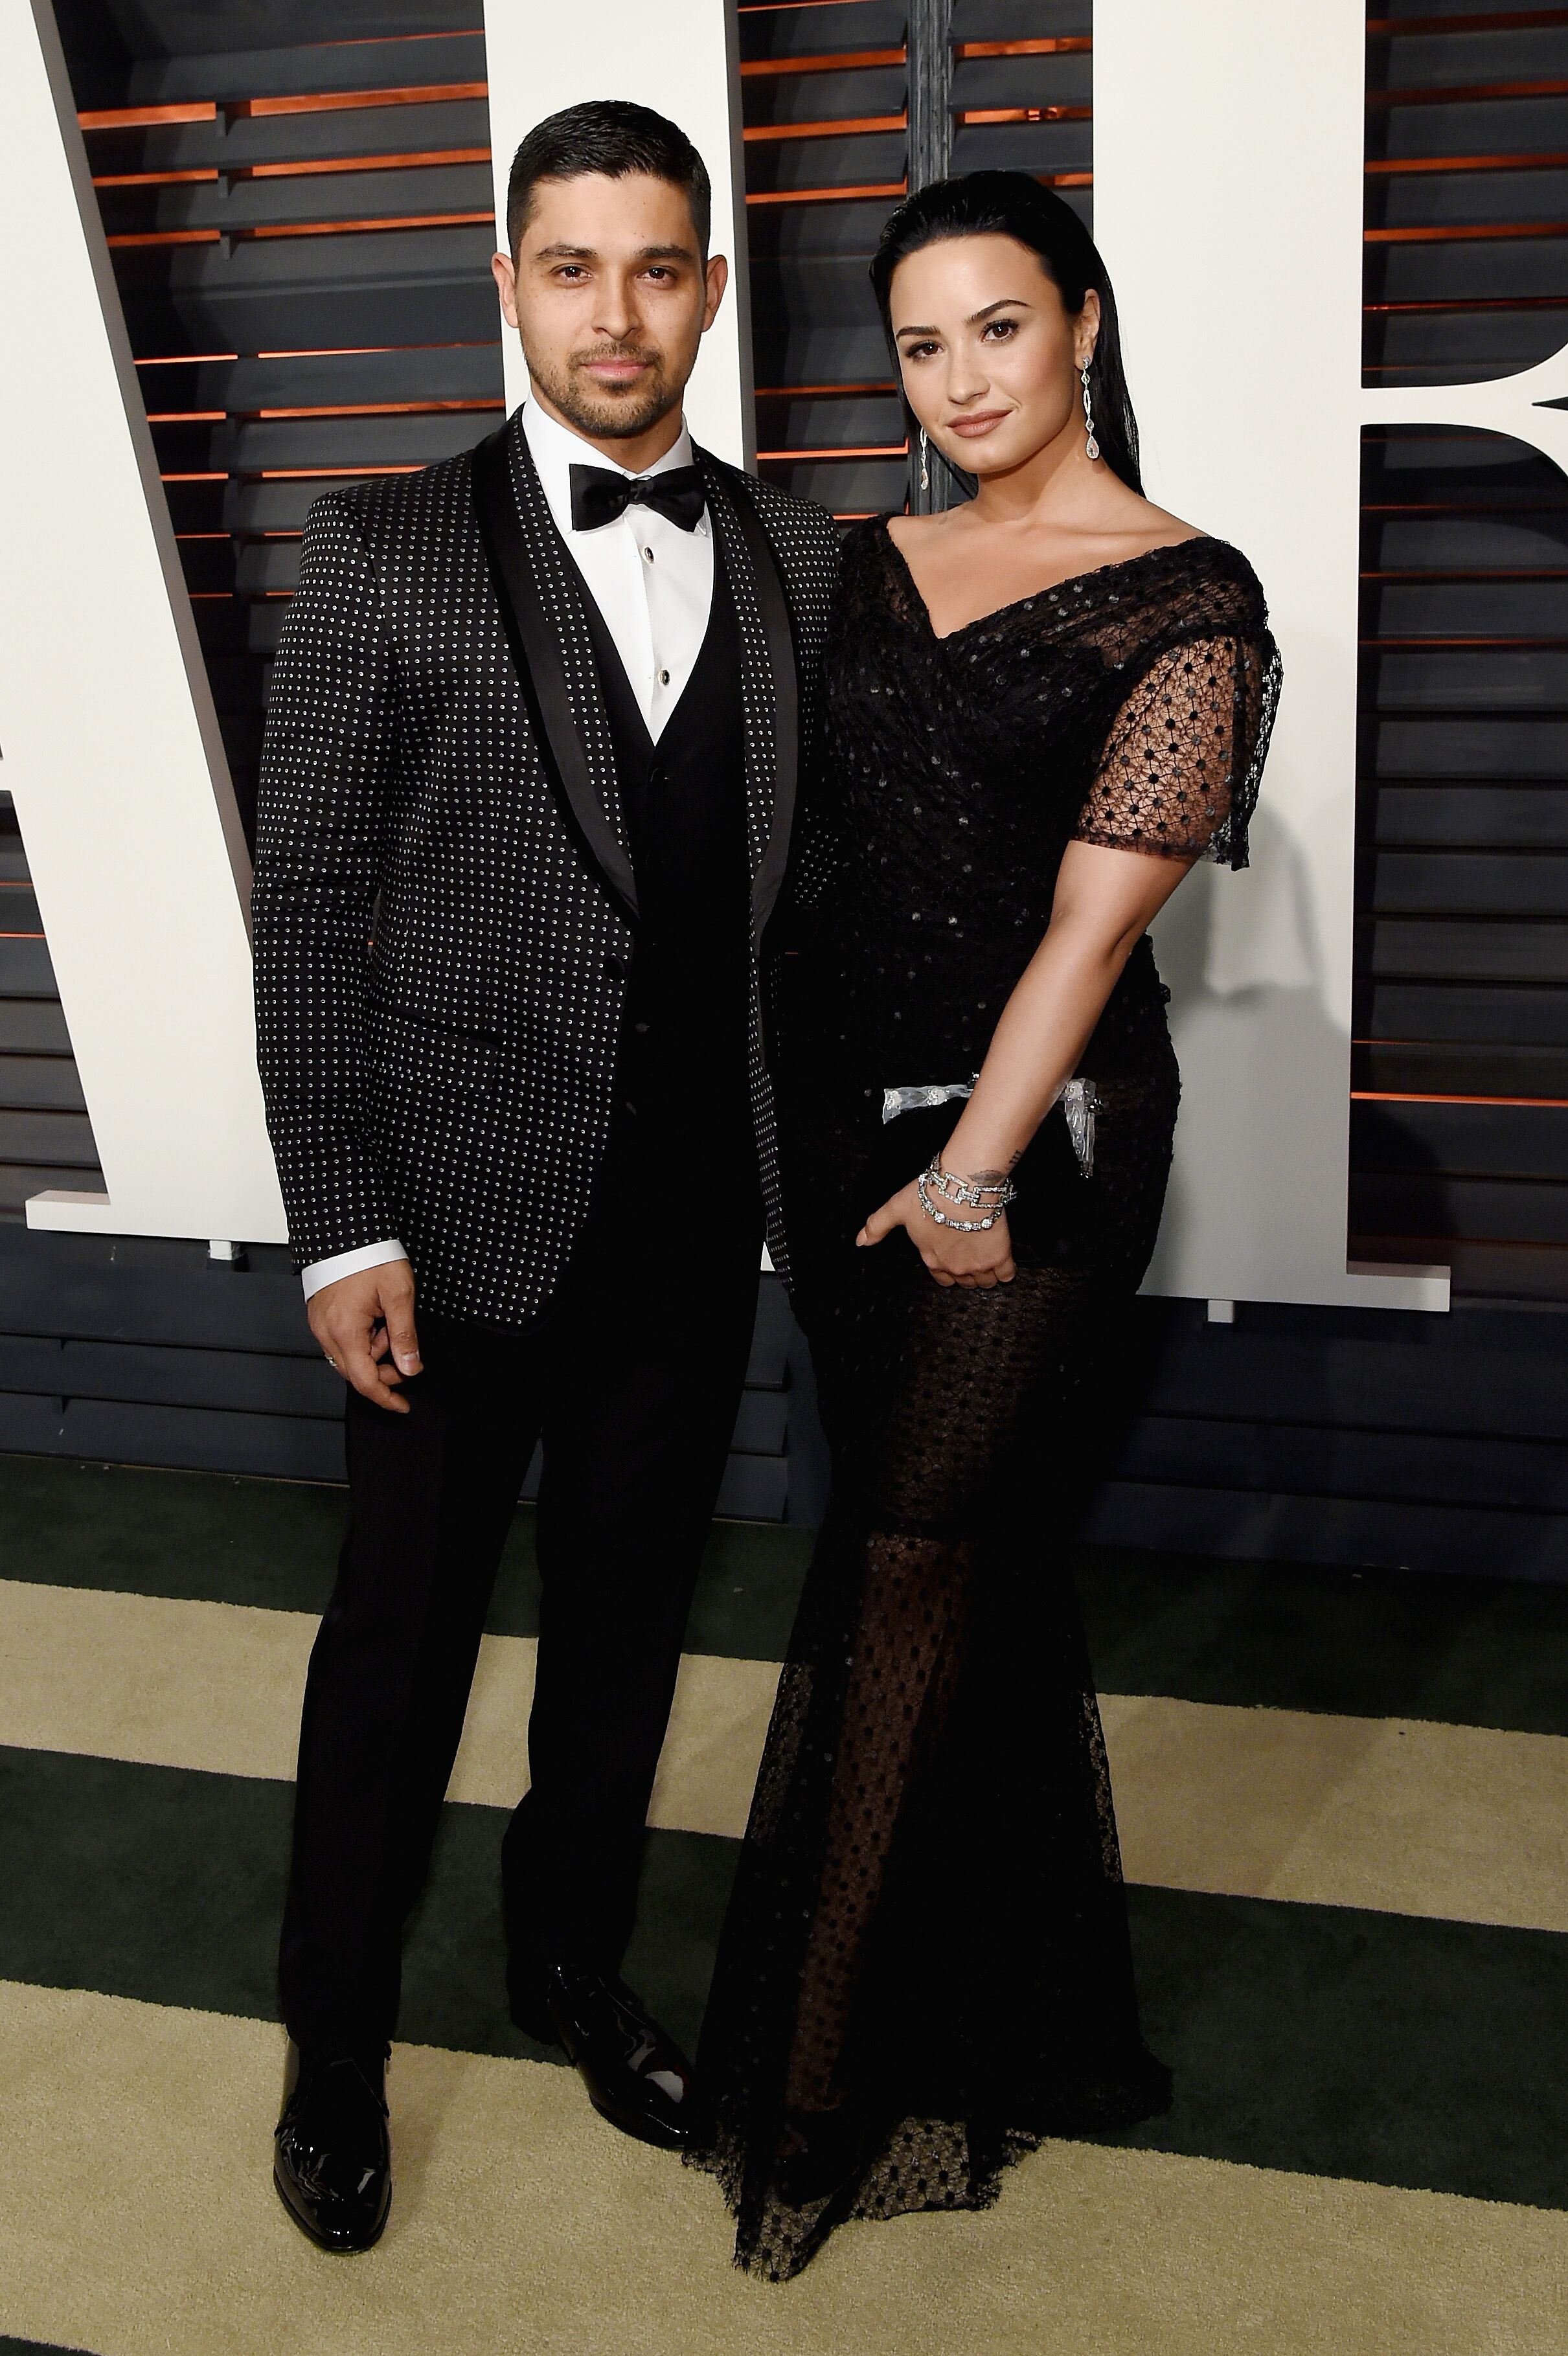 Wilmer Valderrama and Demi Lovato at the 2016 Vanity Fair Oscar Party | Source: Getty Images